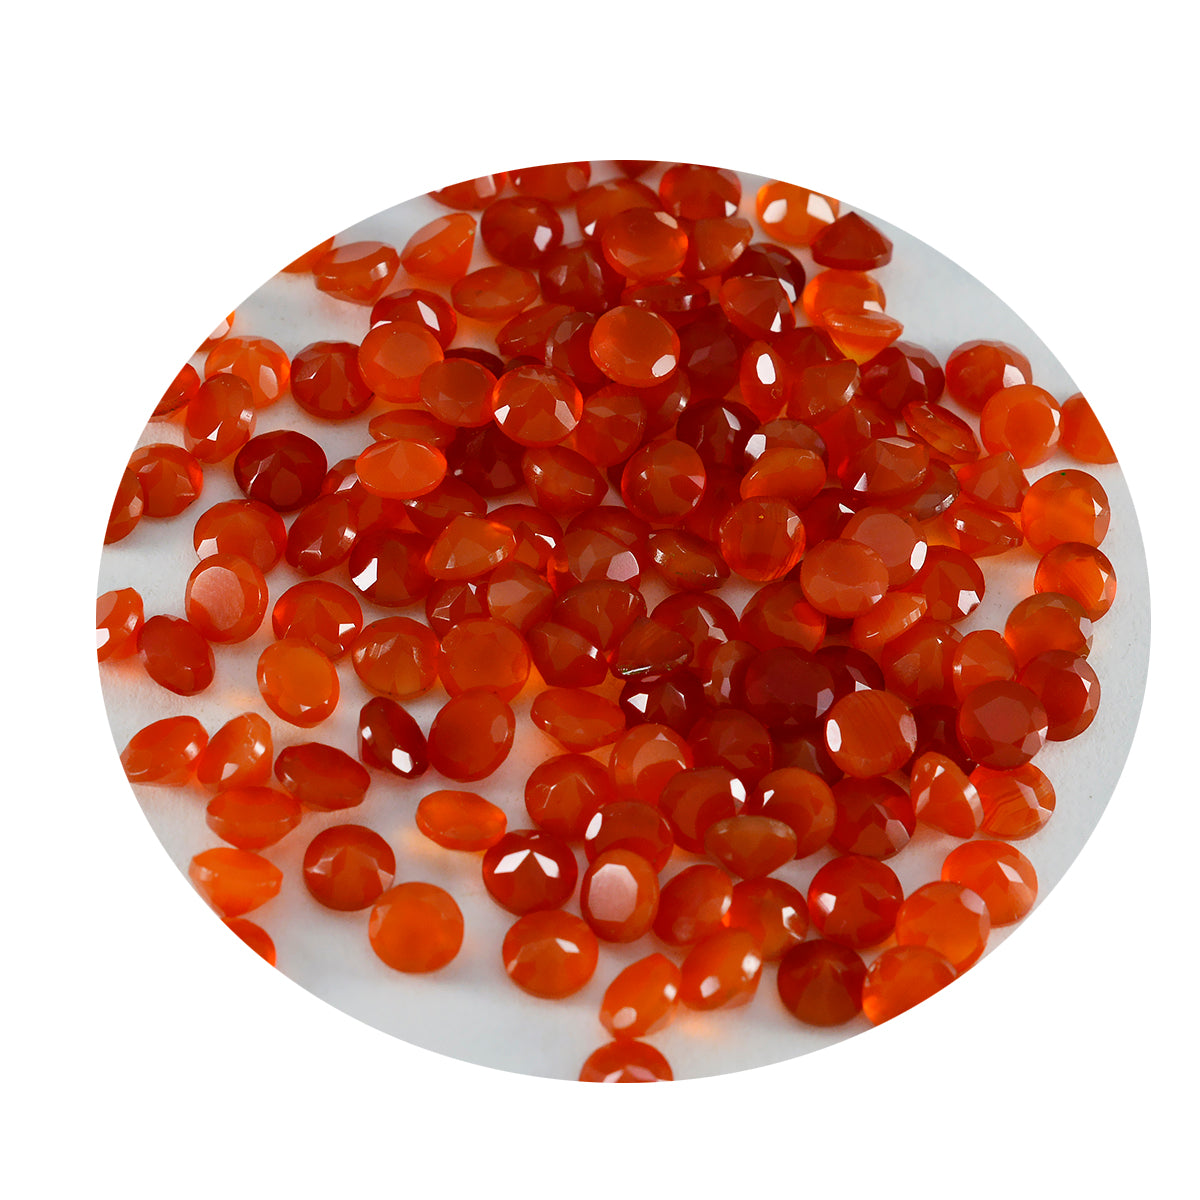 Riyogems 1PC Real Red Onyx Faceted 3x3 mm Round Shape A Quality Loose Gem